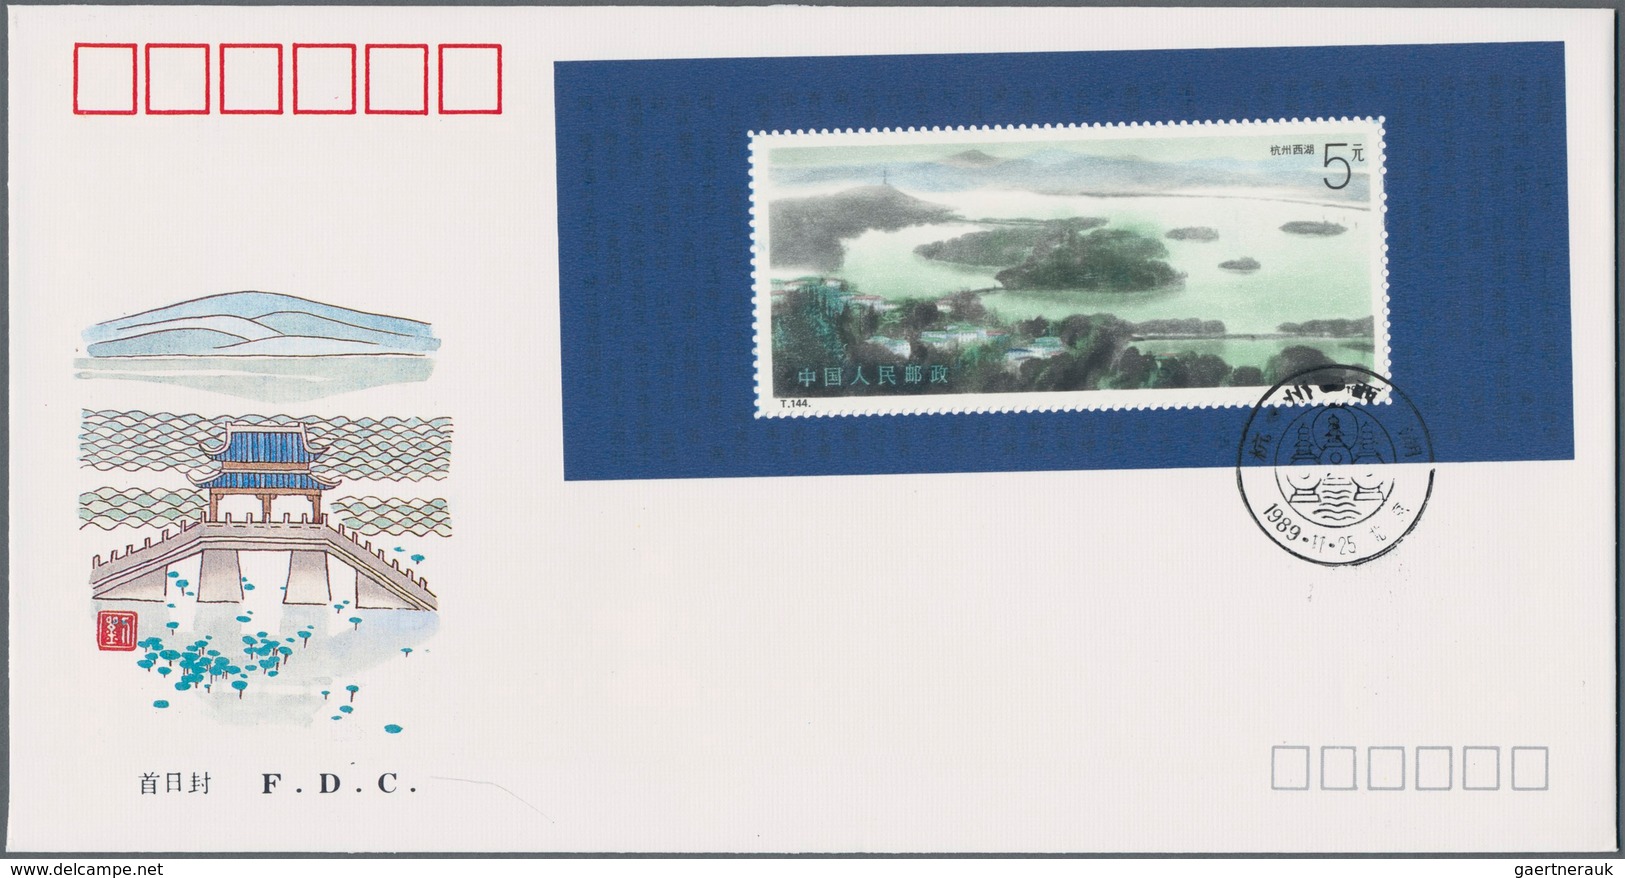 China - Volksrepublik: 1988/2002 (ca.), approx. 800 FDCs of souvenir sheets, usually in duplicates r